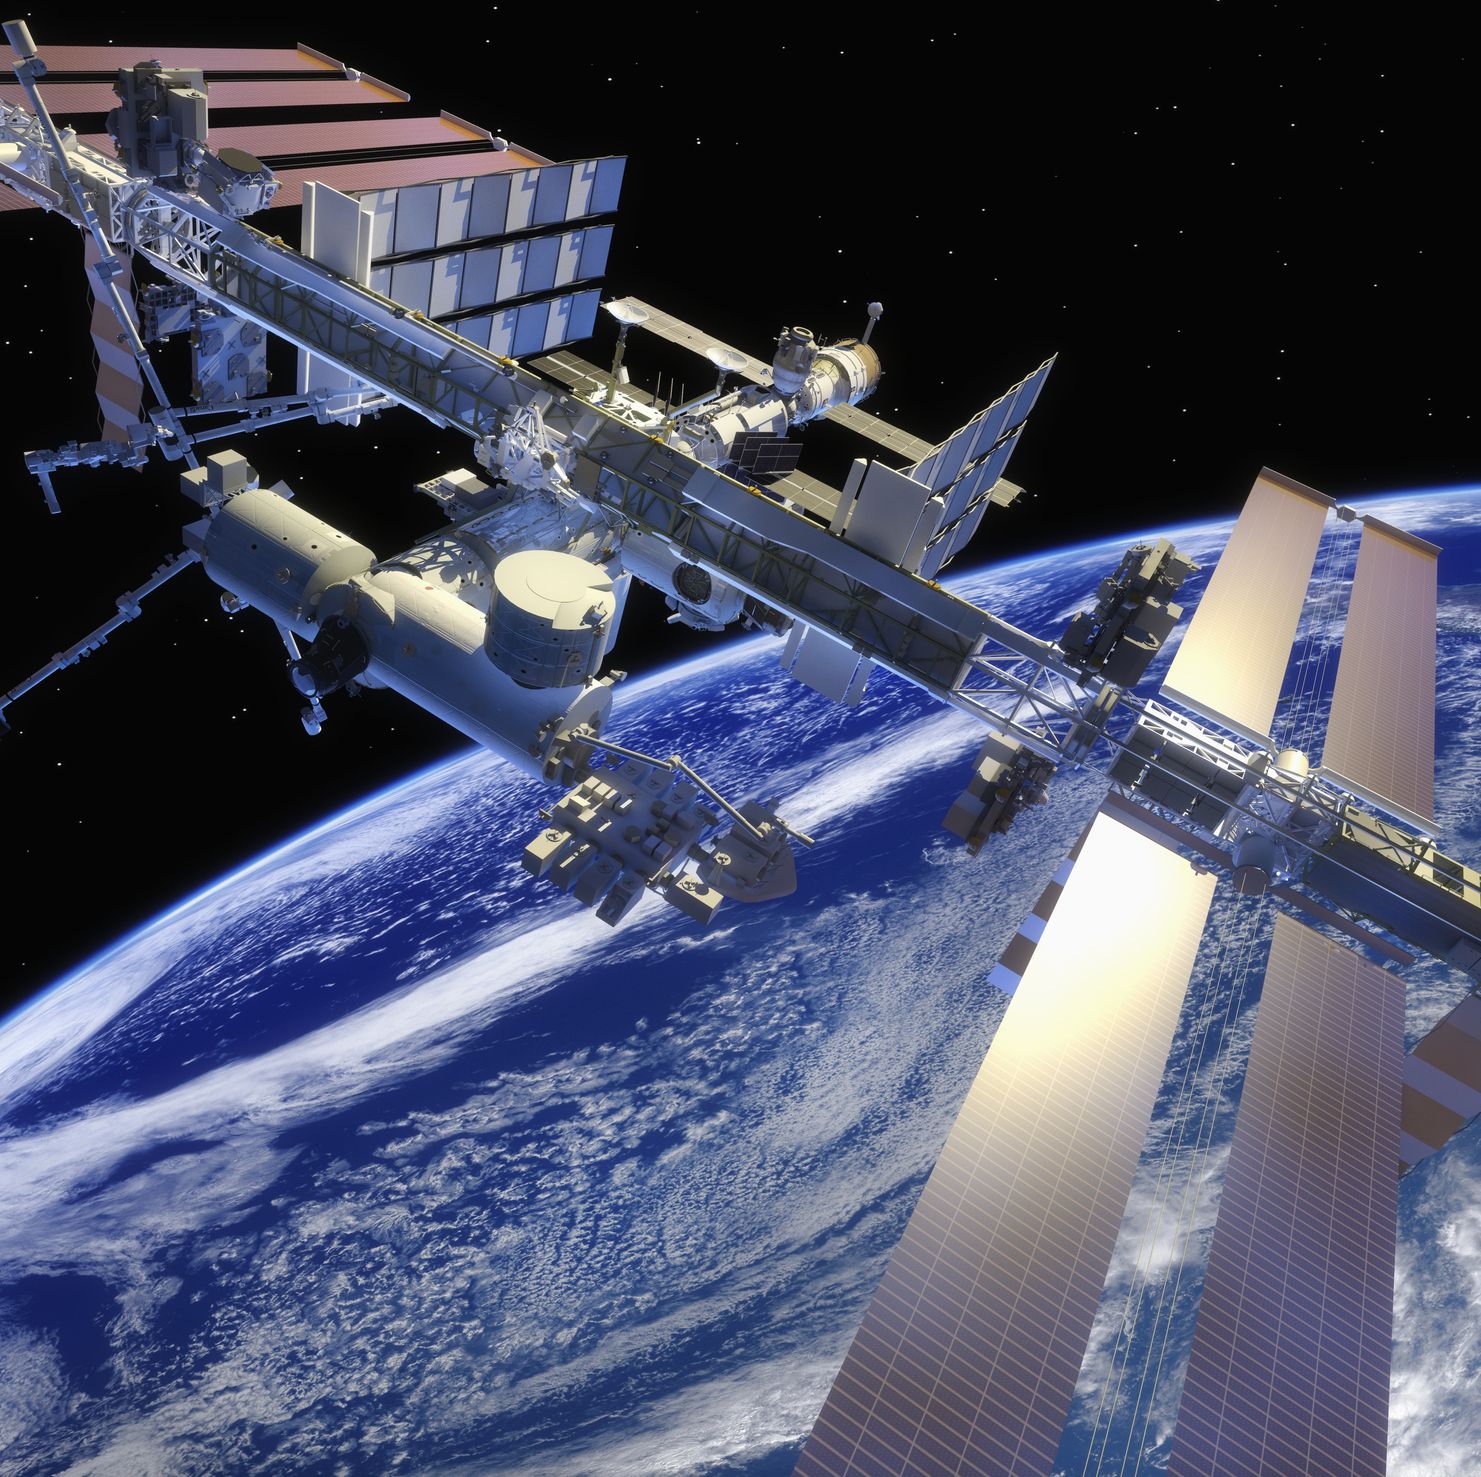 Russia is Leaving the International Space Station. So Now What?